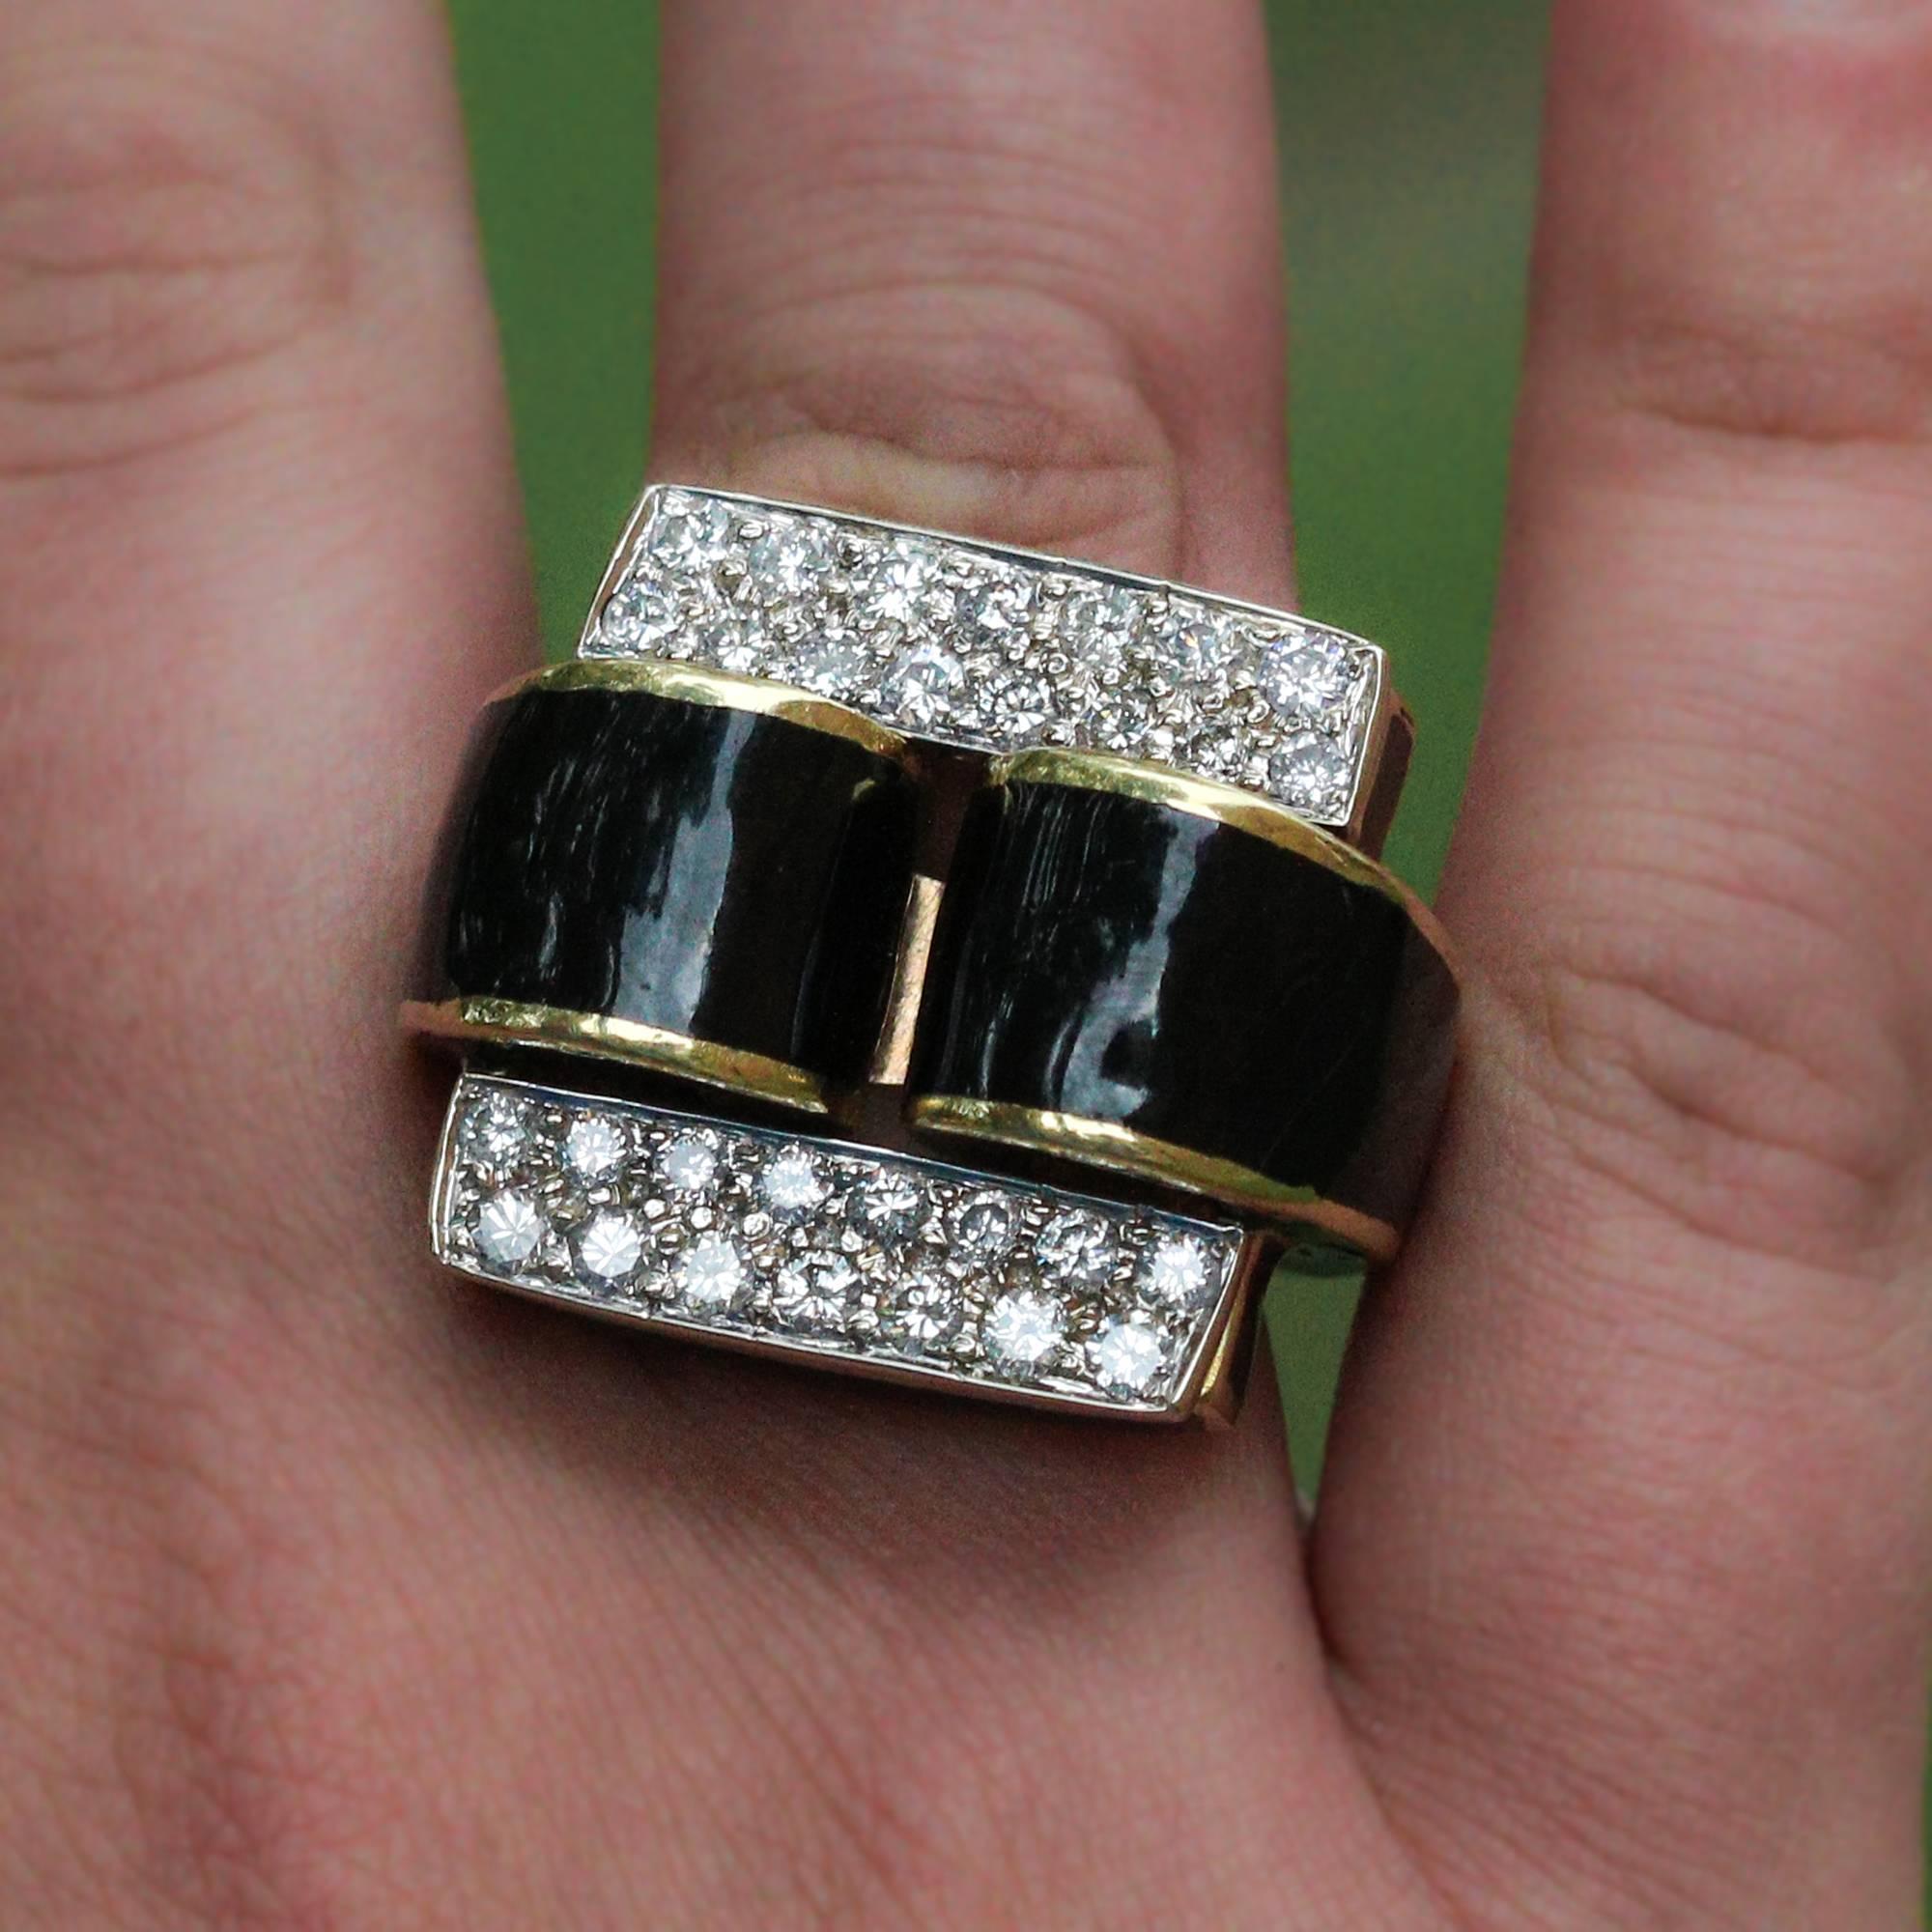 This beautiful ring is made in 18k yellow gold with w hite gold behind the diamonds. The main focus is a unique black enamel design and 30 round brilliant cut diamonds, which weigh an approximate total of 1.40ctw and grade as H-I in color and